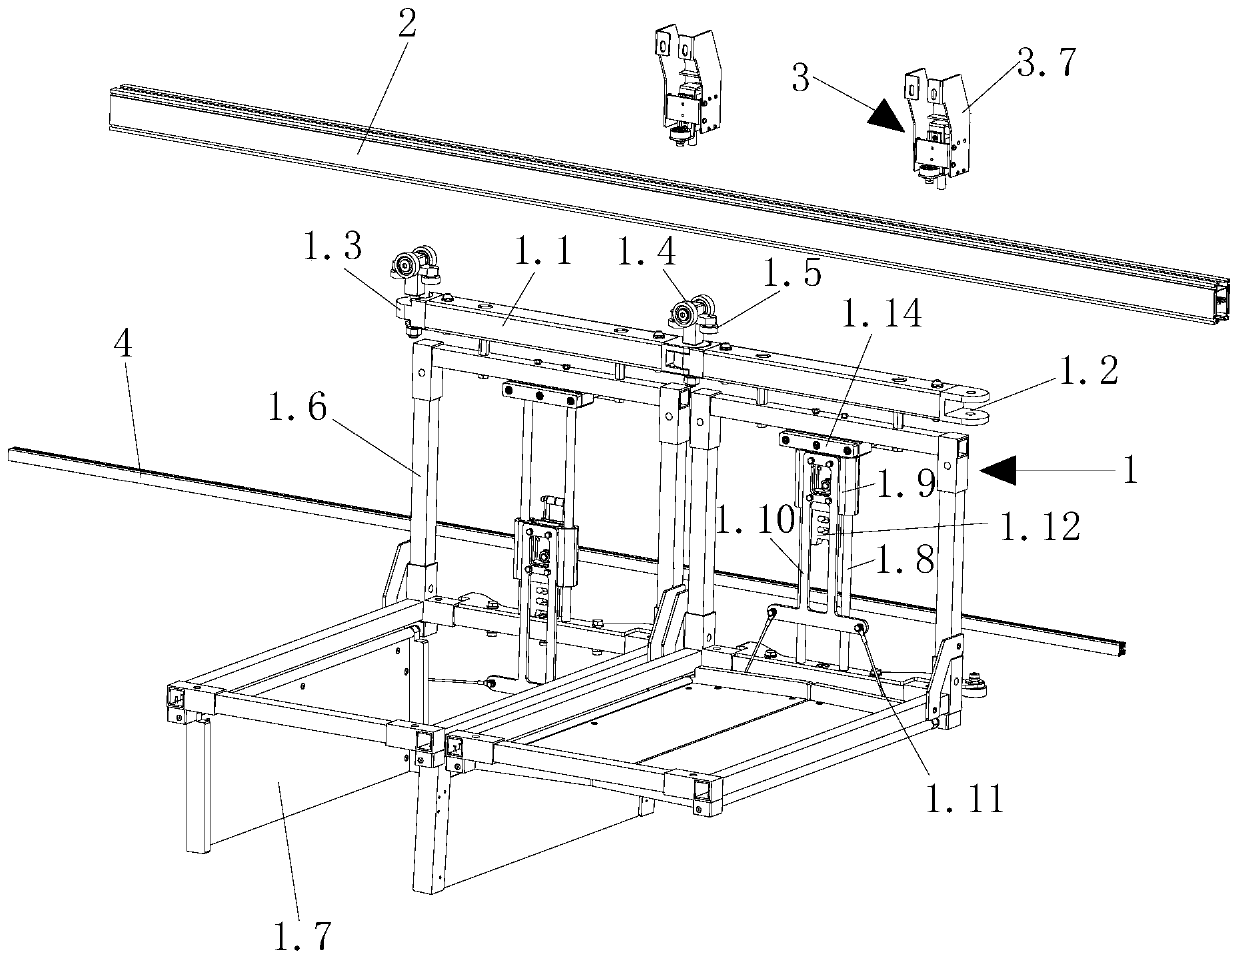 Sorting trolley, trolley turning plate opening mechanism and sorting system